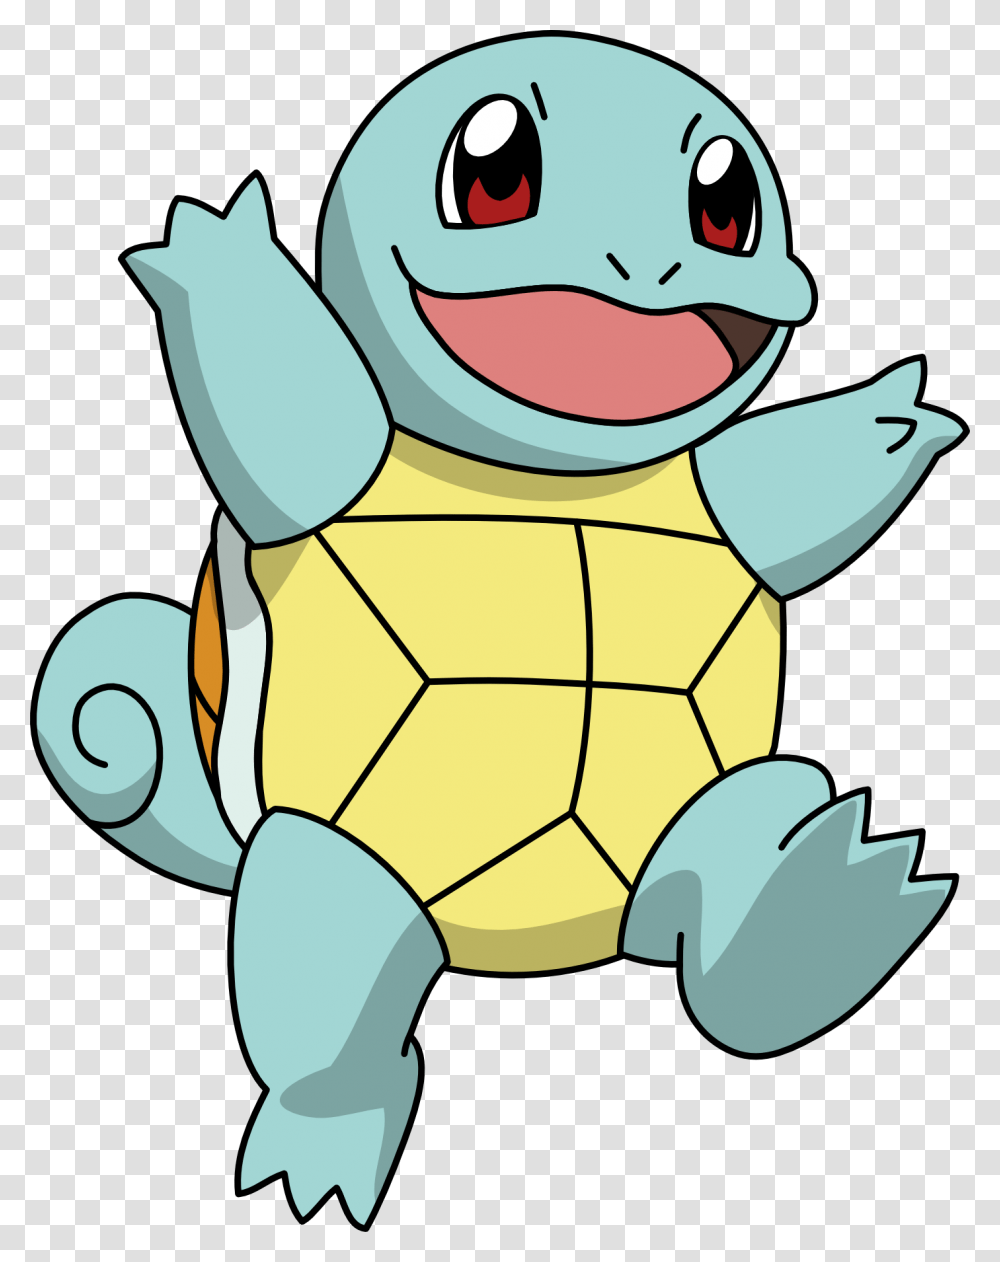 All The Pokemon Games Ranked From Redblue To Xy Pokemon Squirtle, Plush, Toy, Soccer Ball, Football Transparent Png